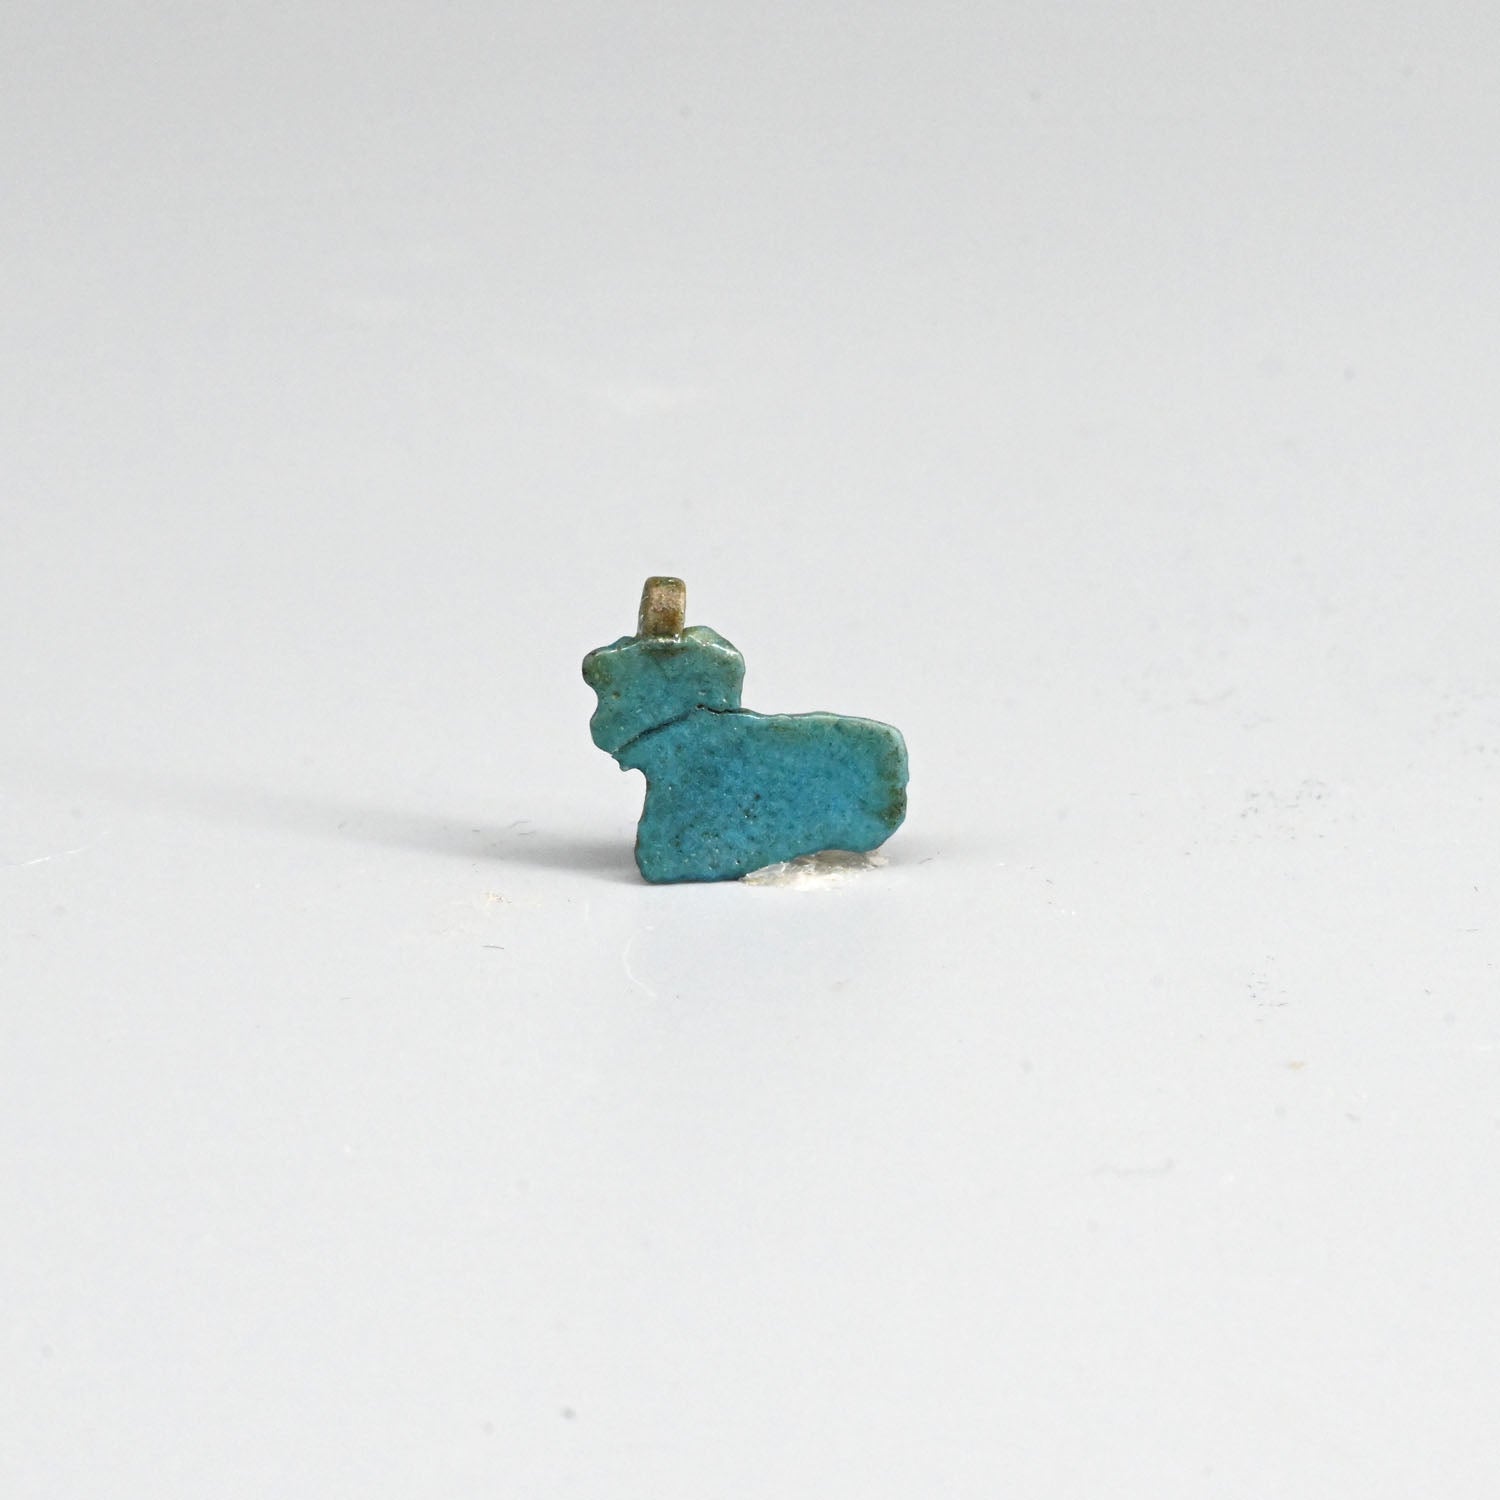 An Egyptian Blue Faience Cow Amulet, Late Period ca. 664 - 332 BCE